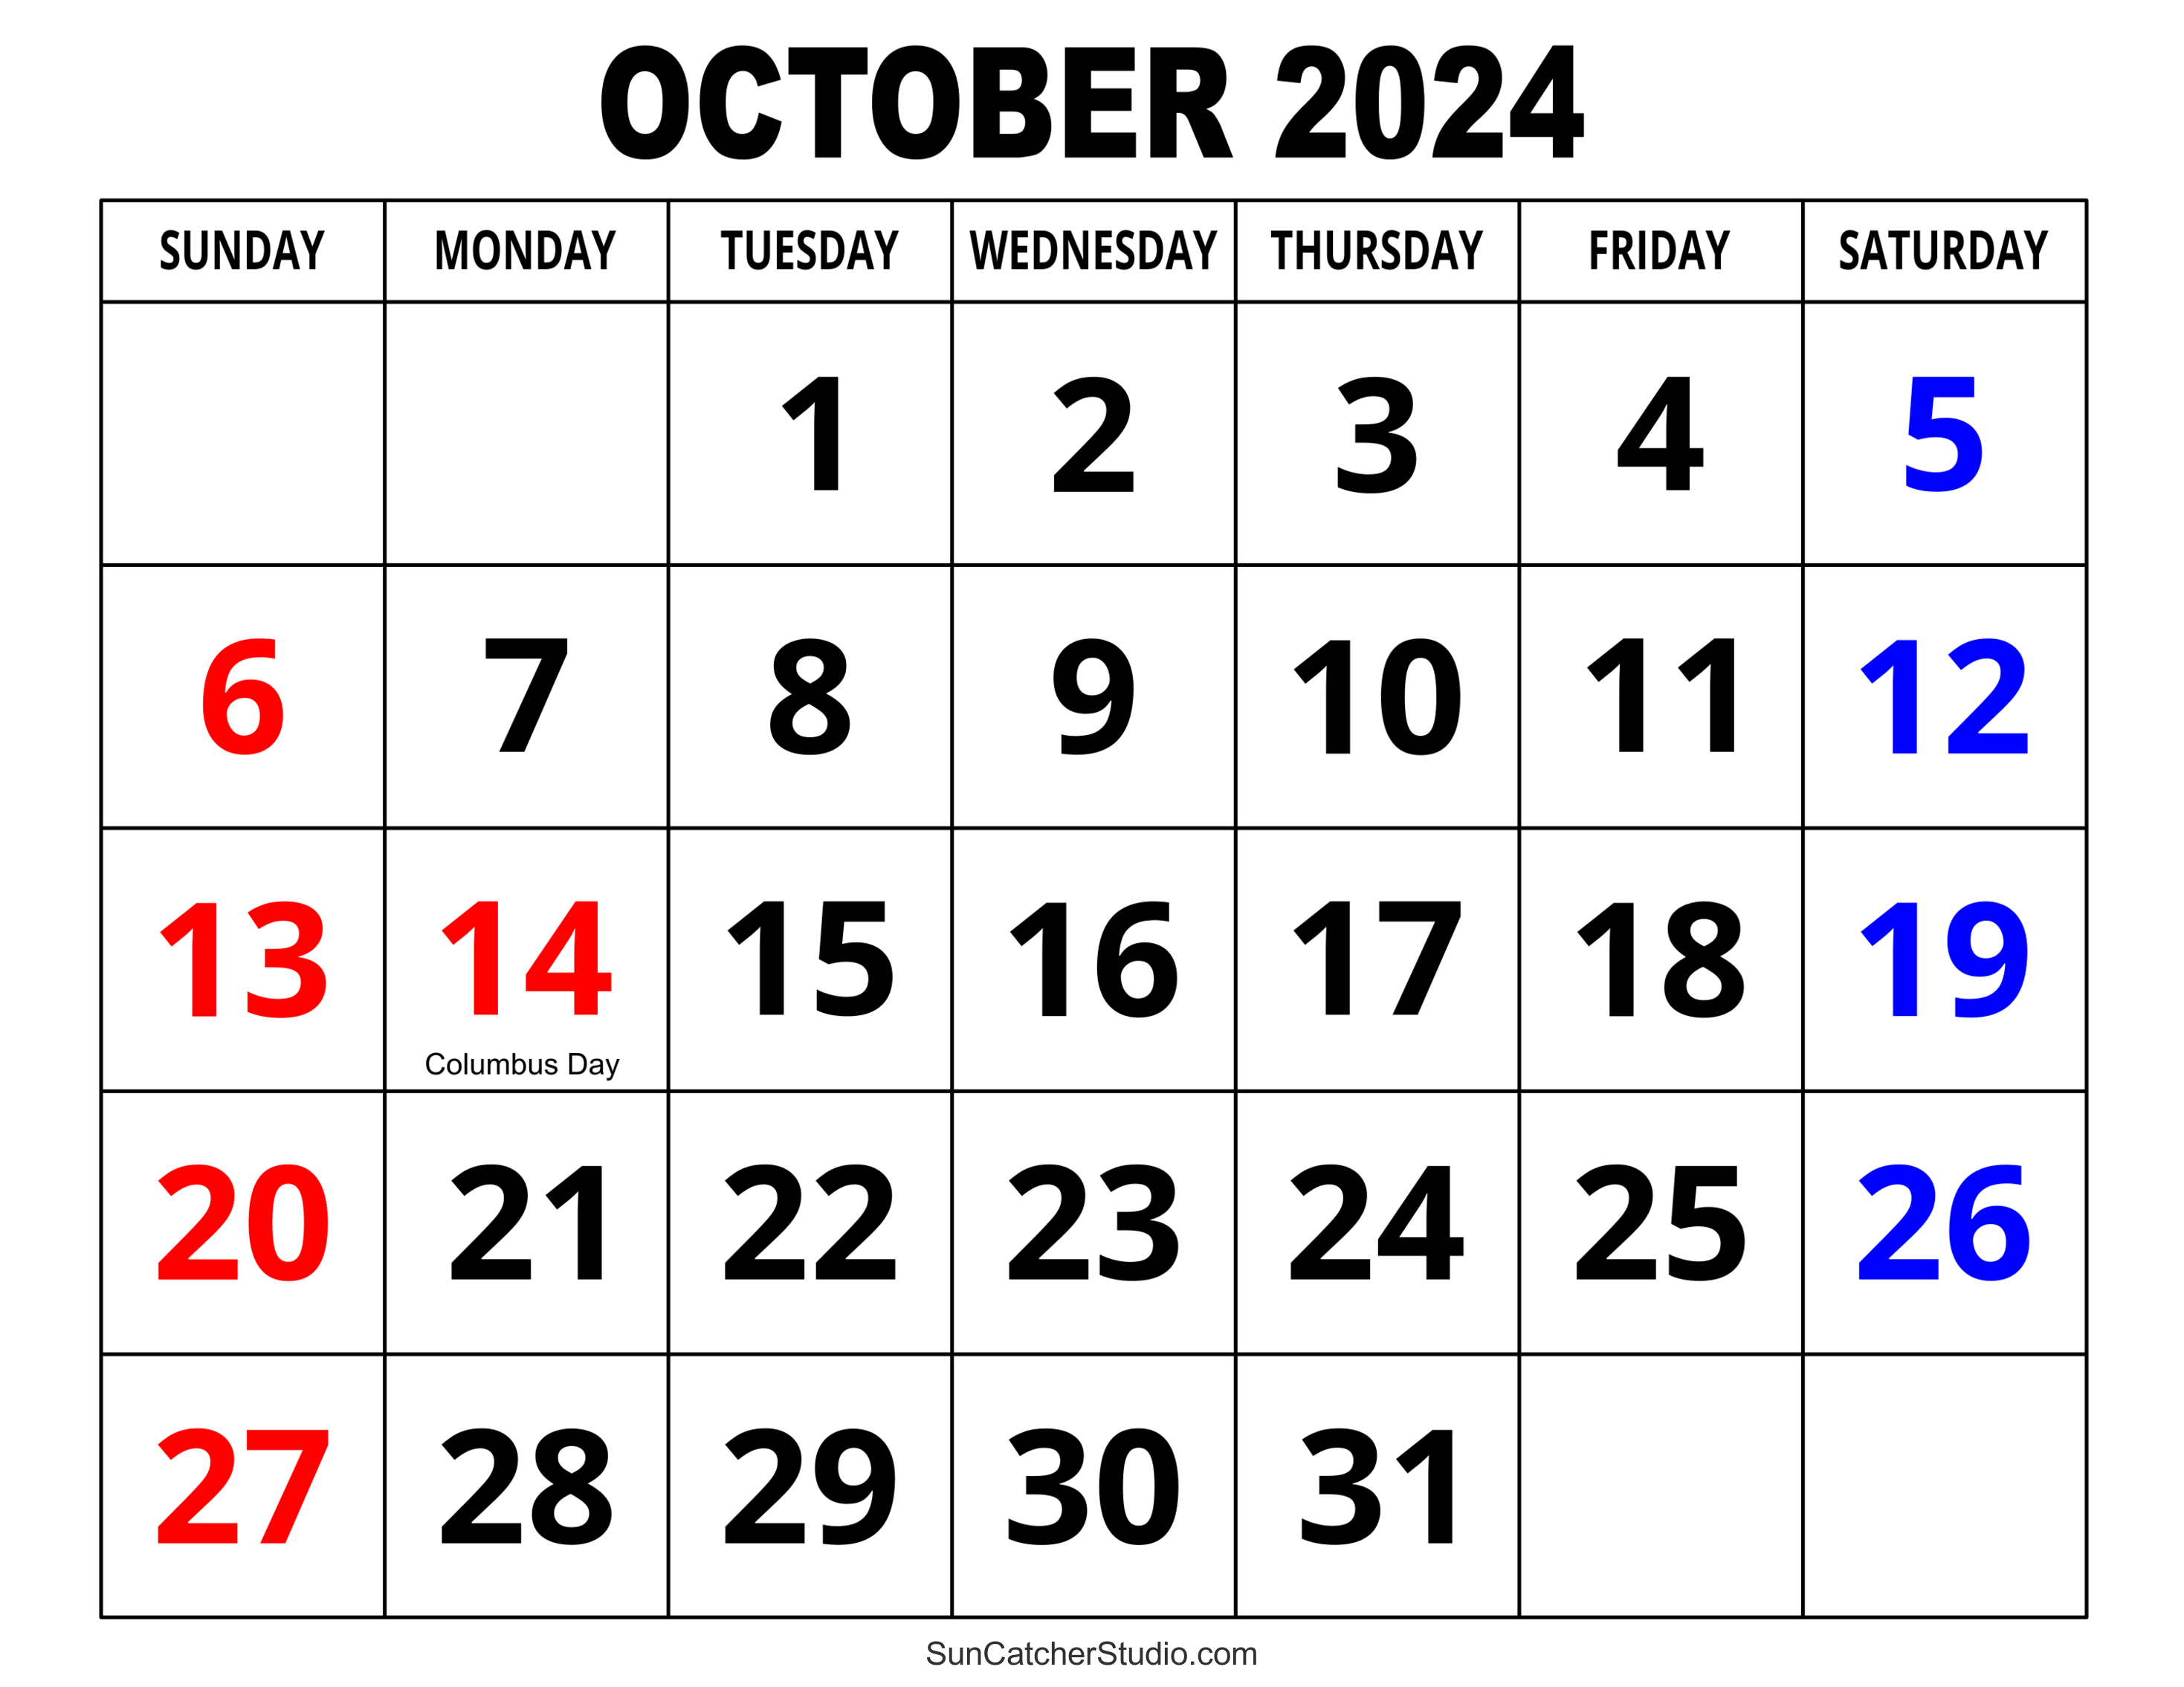 October 2024 Calendar (Free Printable) – Diy Projects, Patterns regarding Free Printable Calendar 2024 October And November